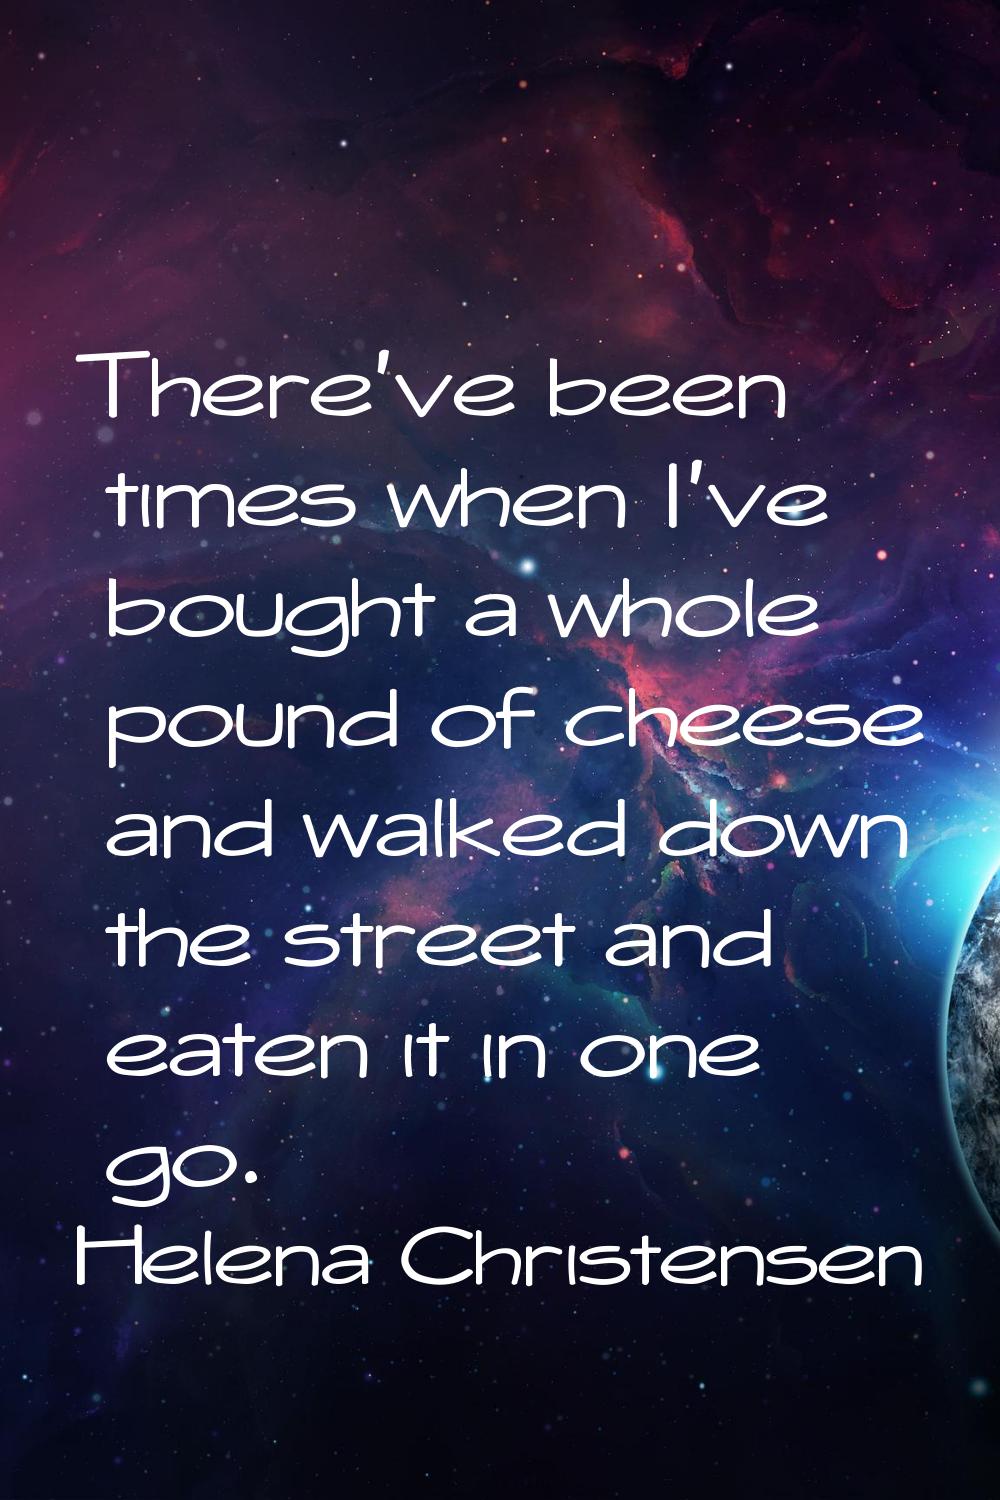 There've been times when I've bought a whole pound of cheese and walked down the street and eaten i